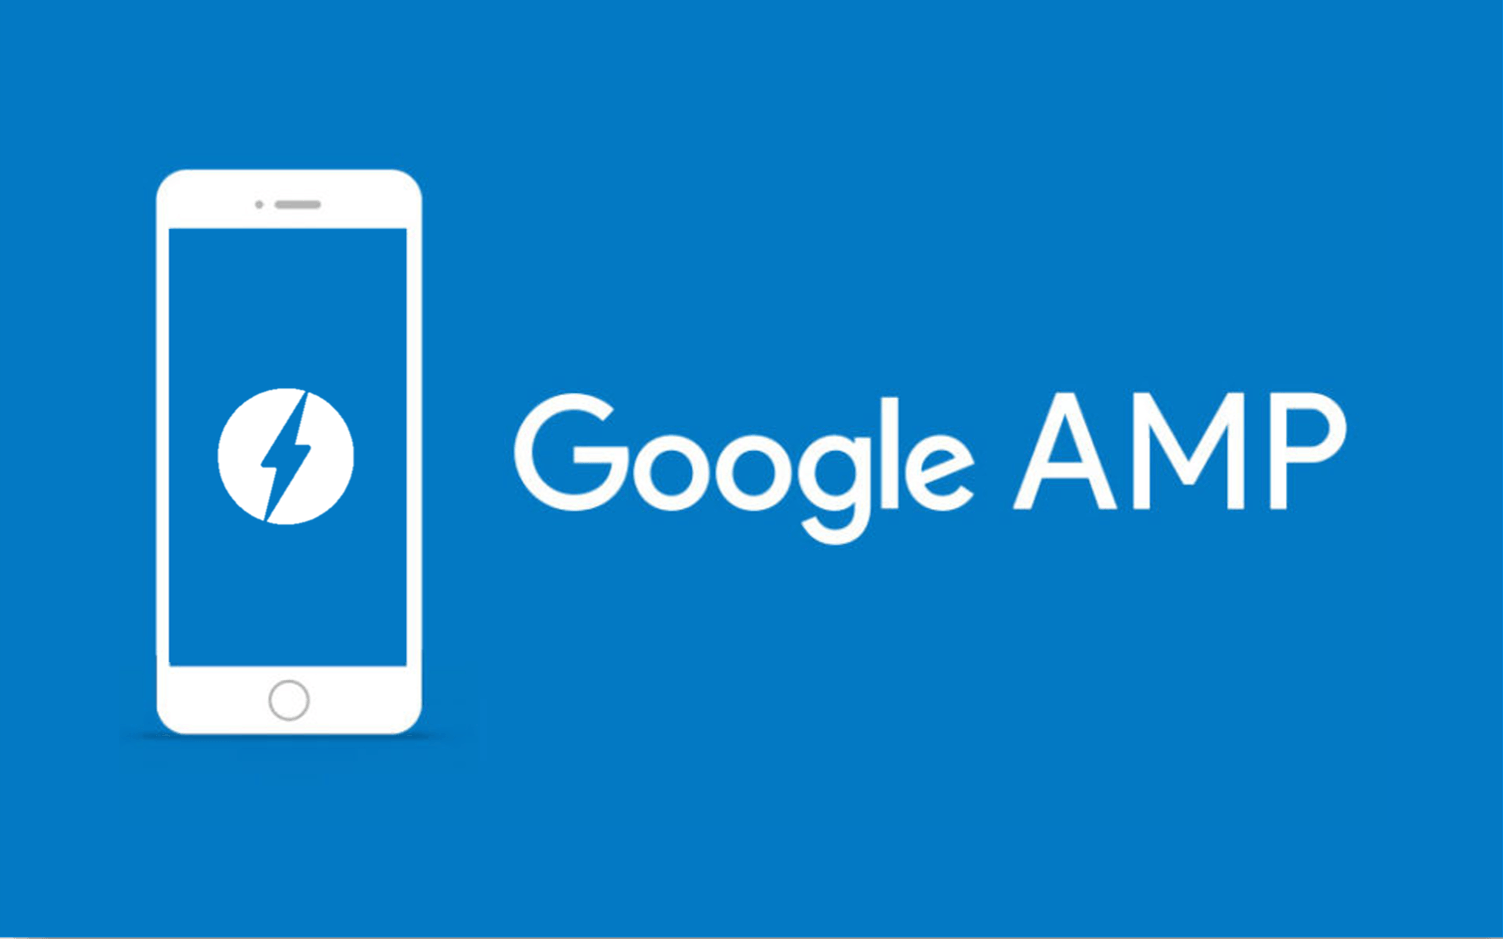 What is Google AMP